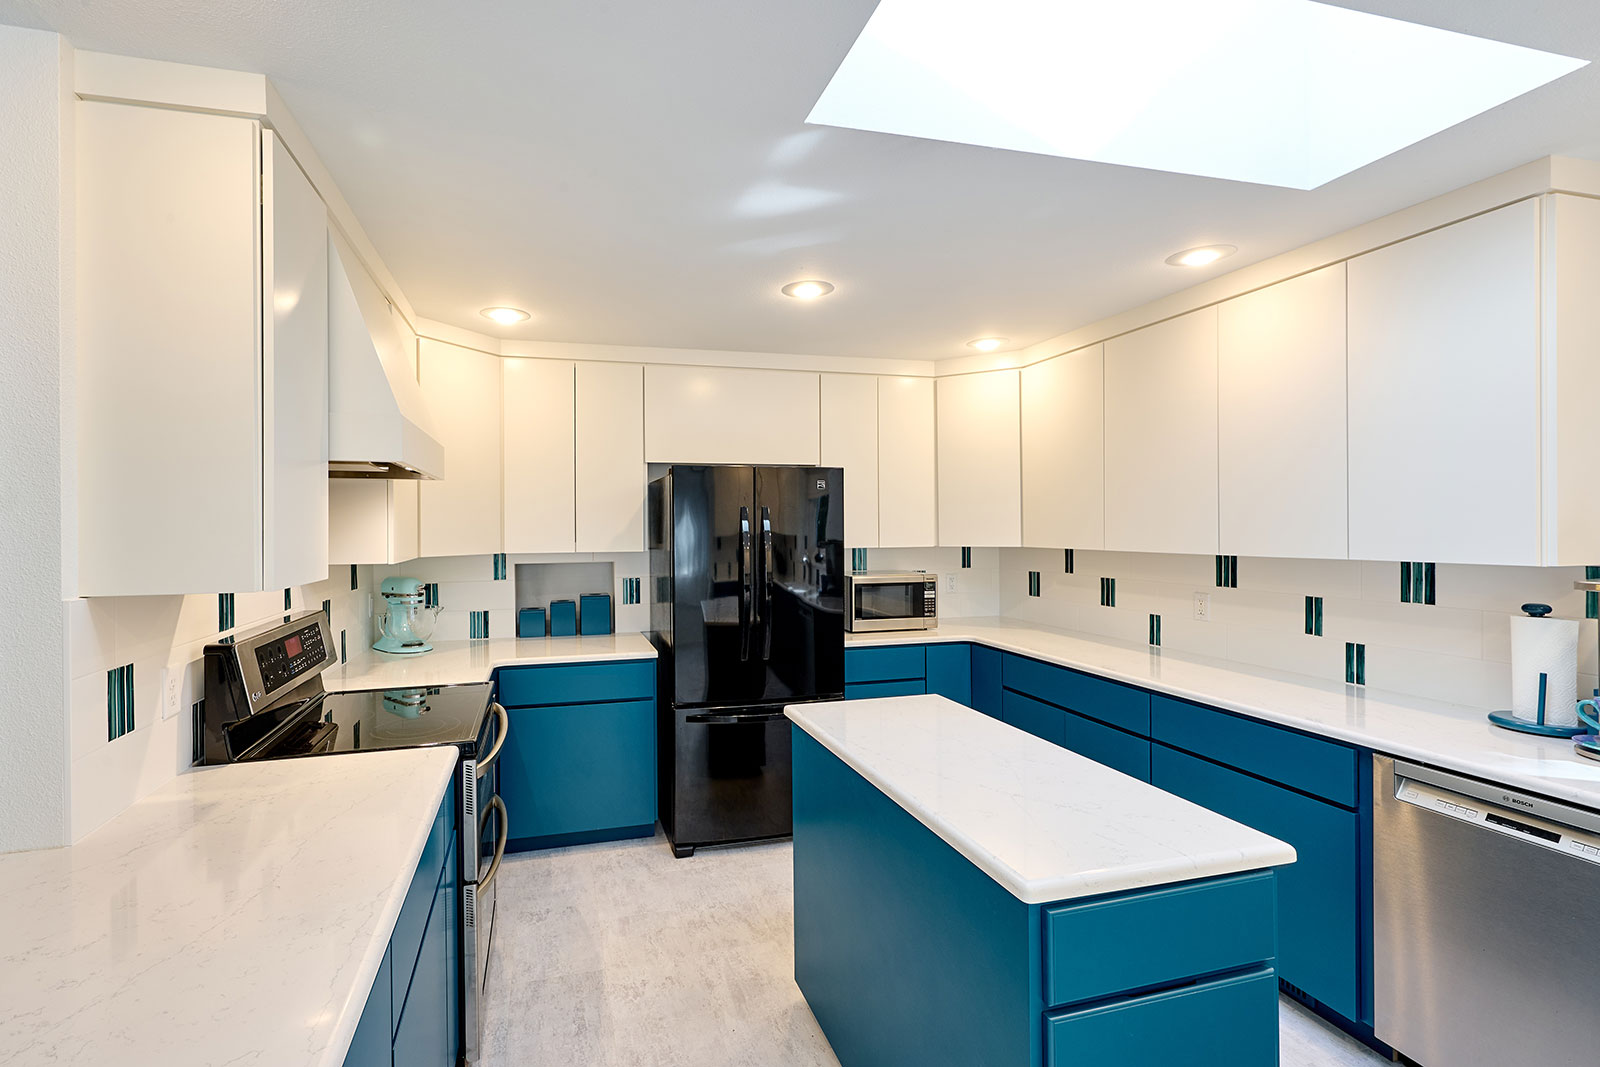 Kitchen Remodeling Corvallis, OR Home Remodeling